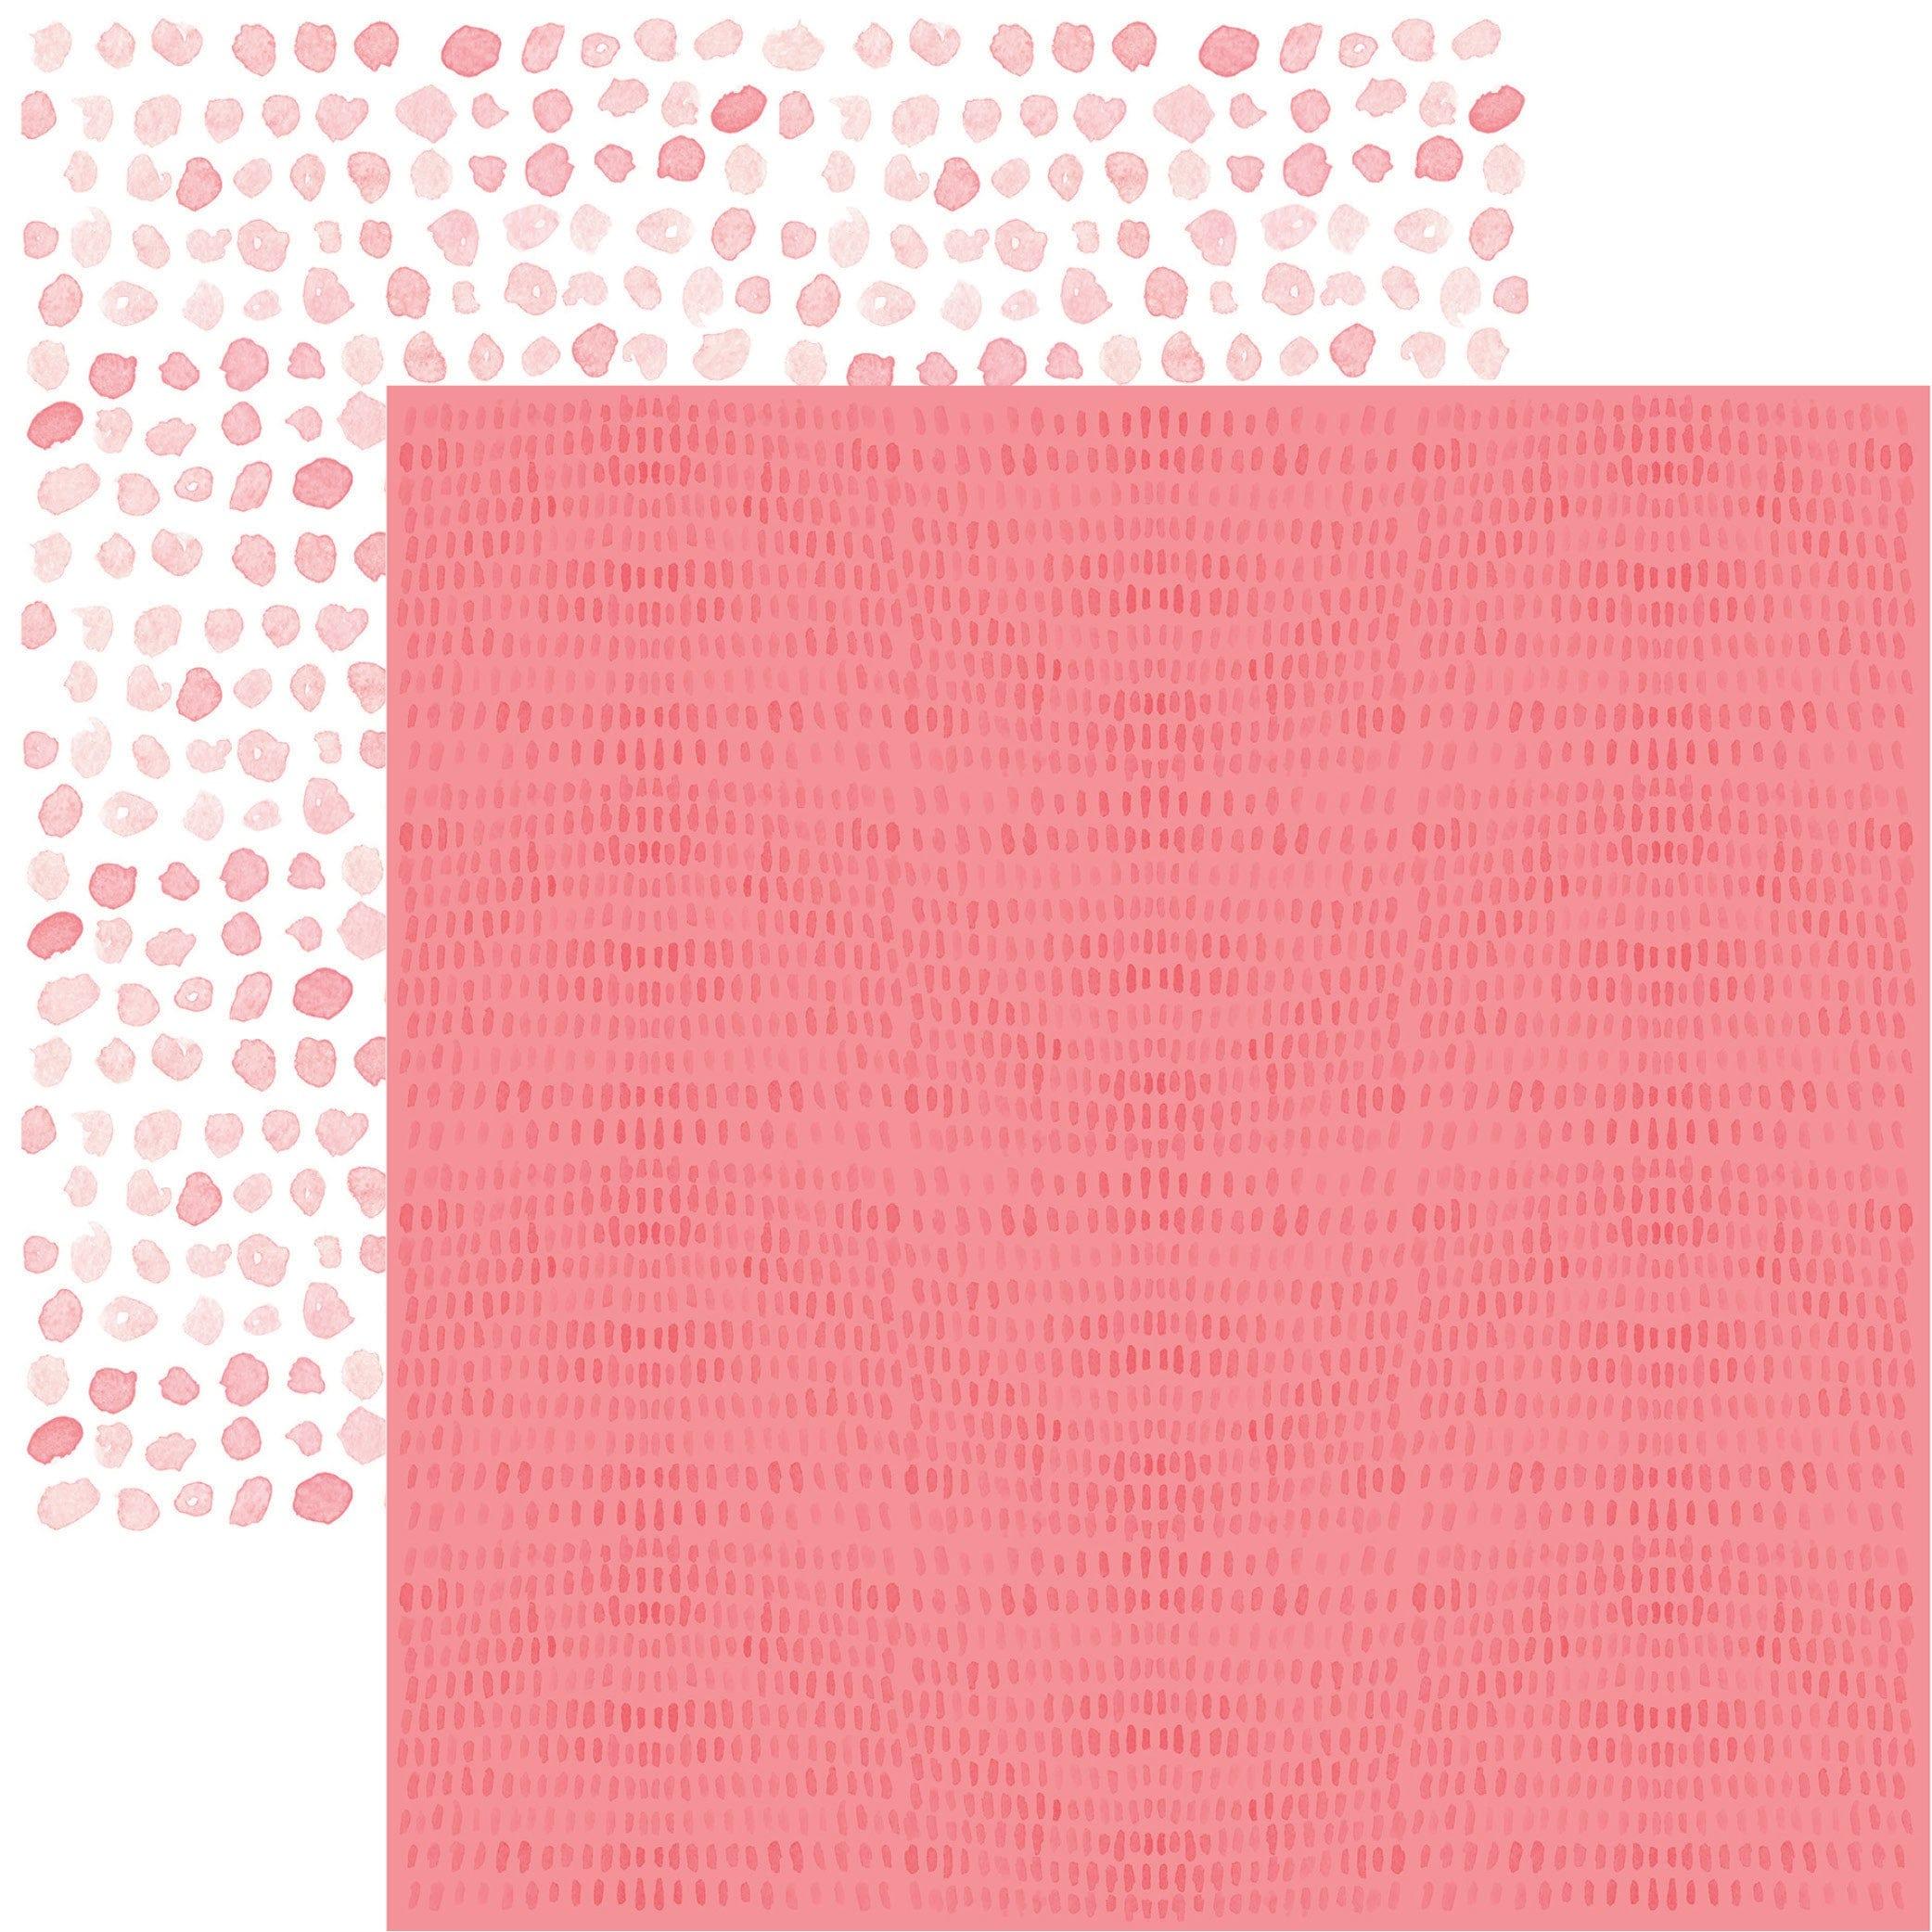 Forever In Love Collection Follow Your Heart 12 x 12 Double-Sided Scrapbook Paper by Reminisce - Scrapbook Supply Companies